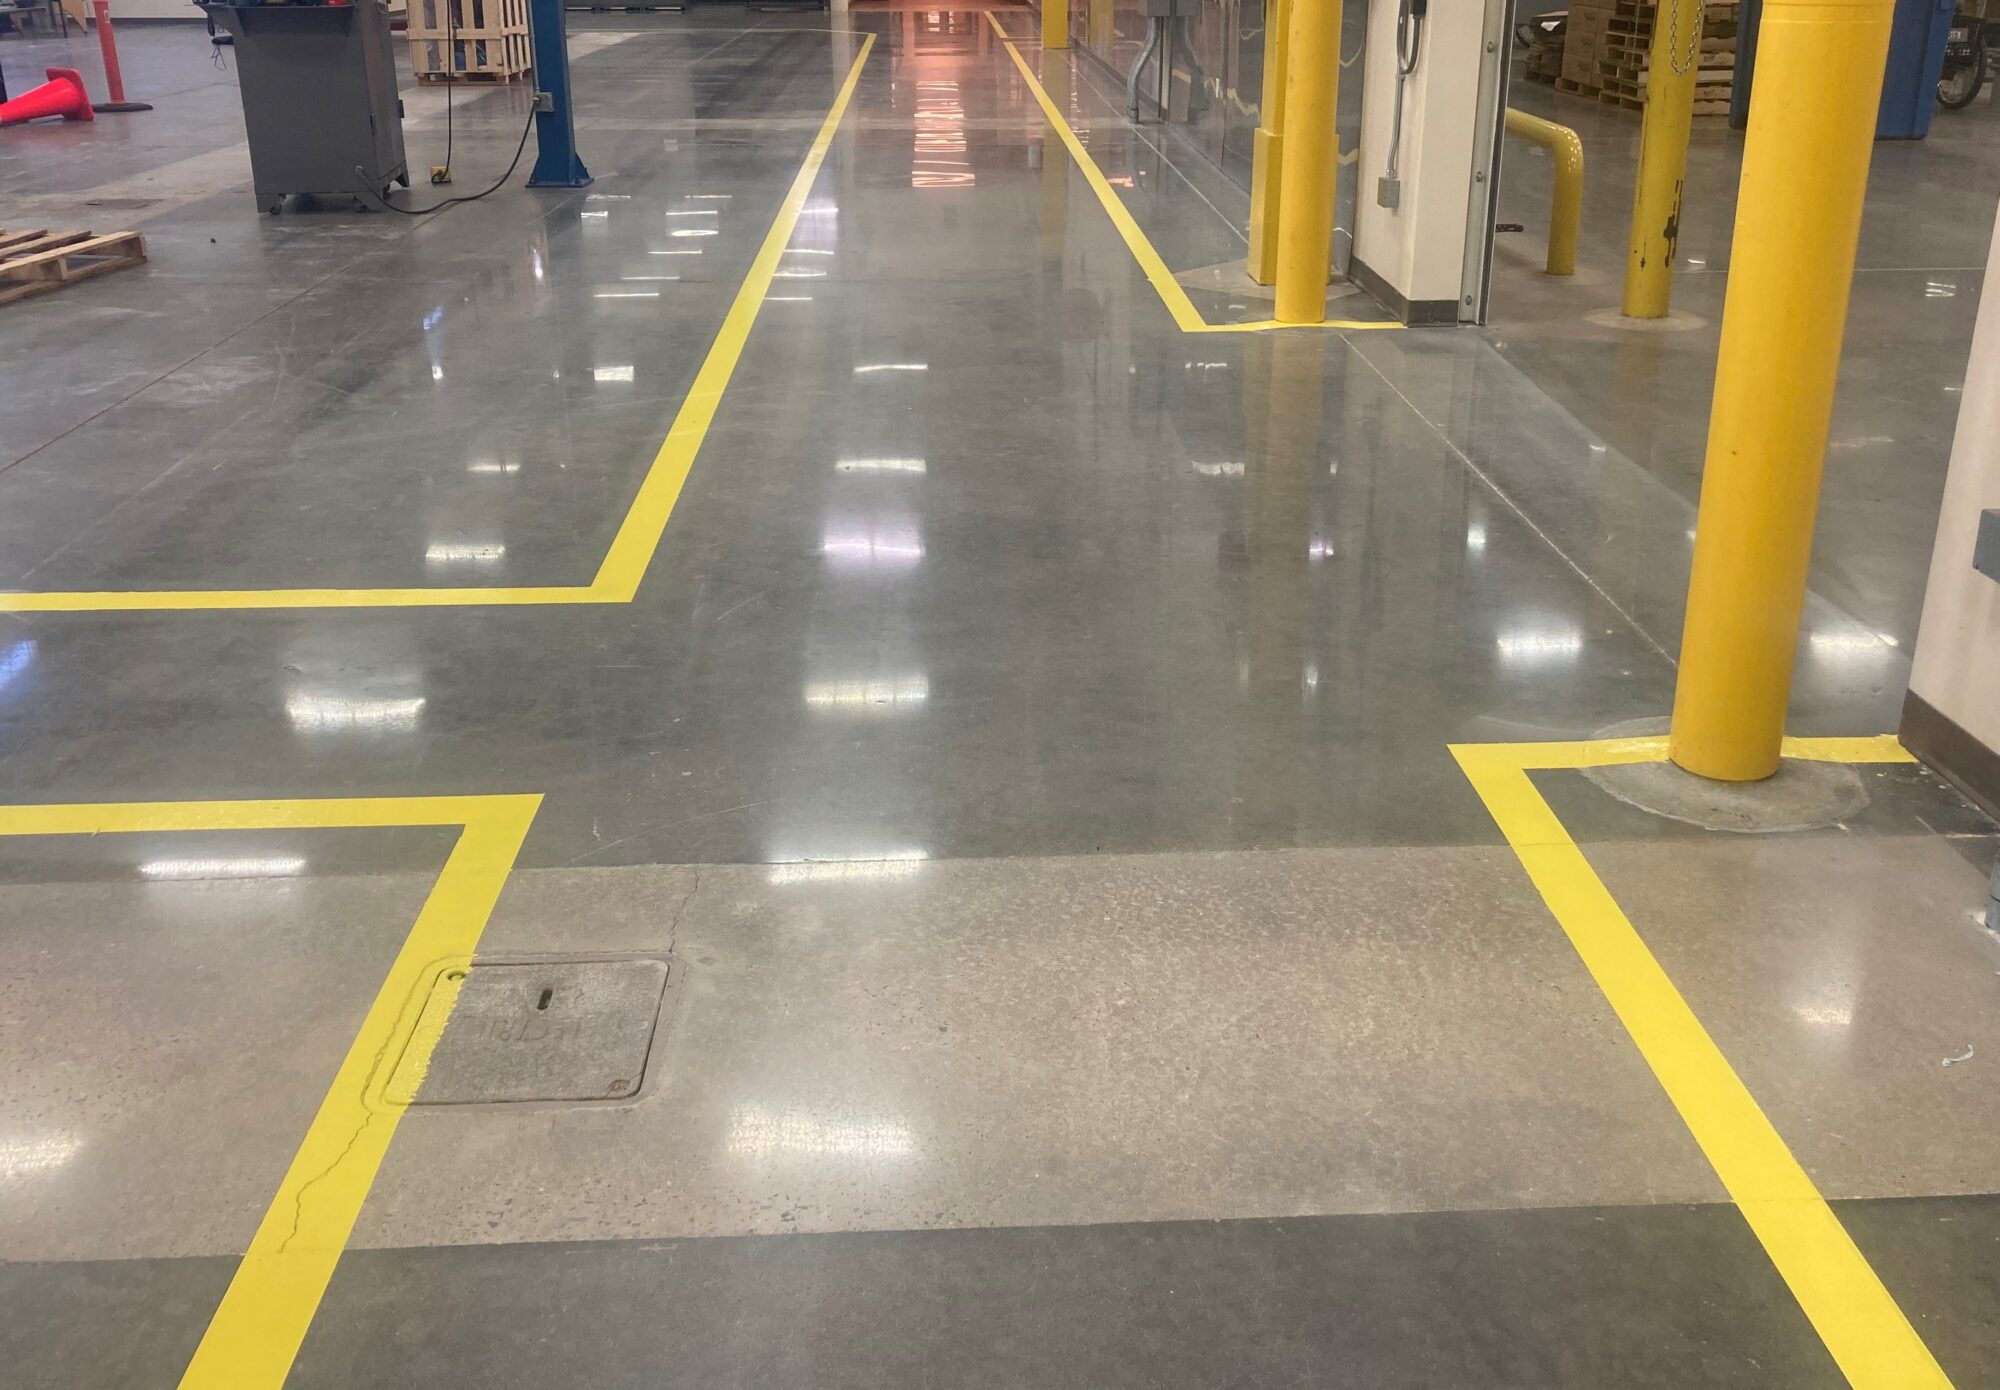 Safety striping, polished concrete, Polished concrete floors, industrial safety, pedestrian walkways in manufacturing, epoxy floor markings, 5S, TeamIA, Industrial Applications Inc, epoxy flooring solutions, flooring contractors Memphis TN, Memphis TN